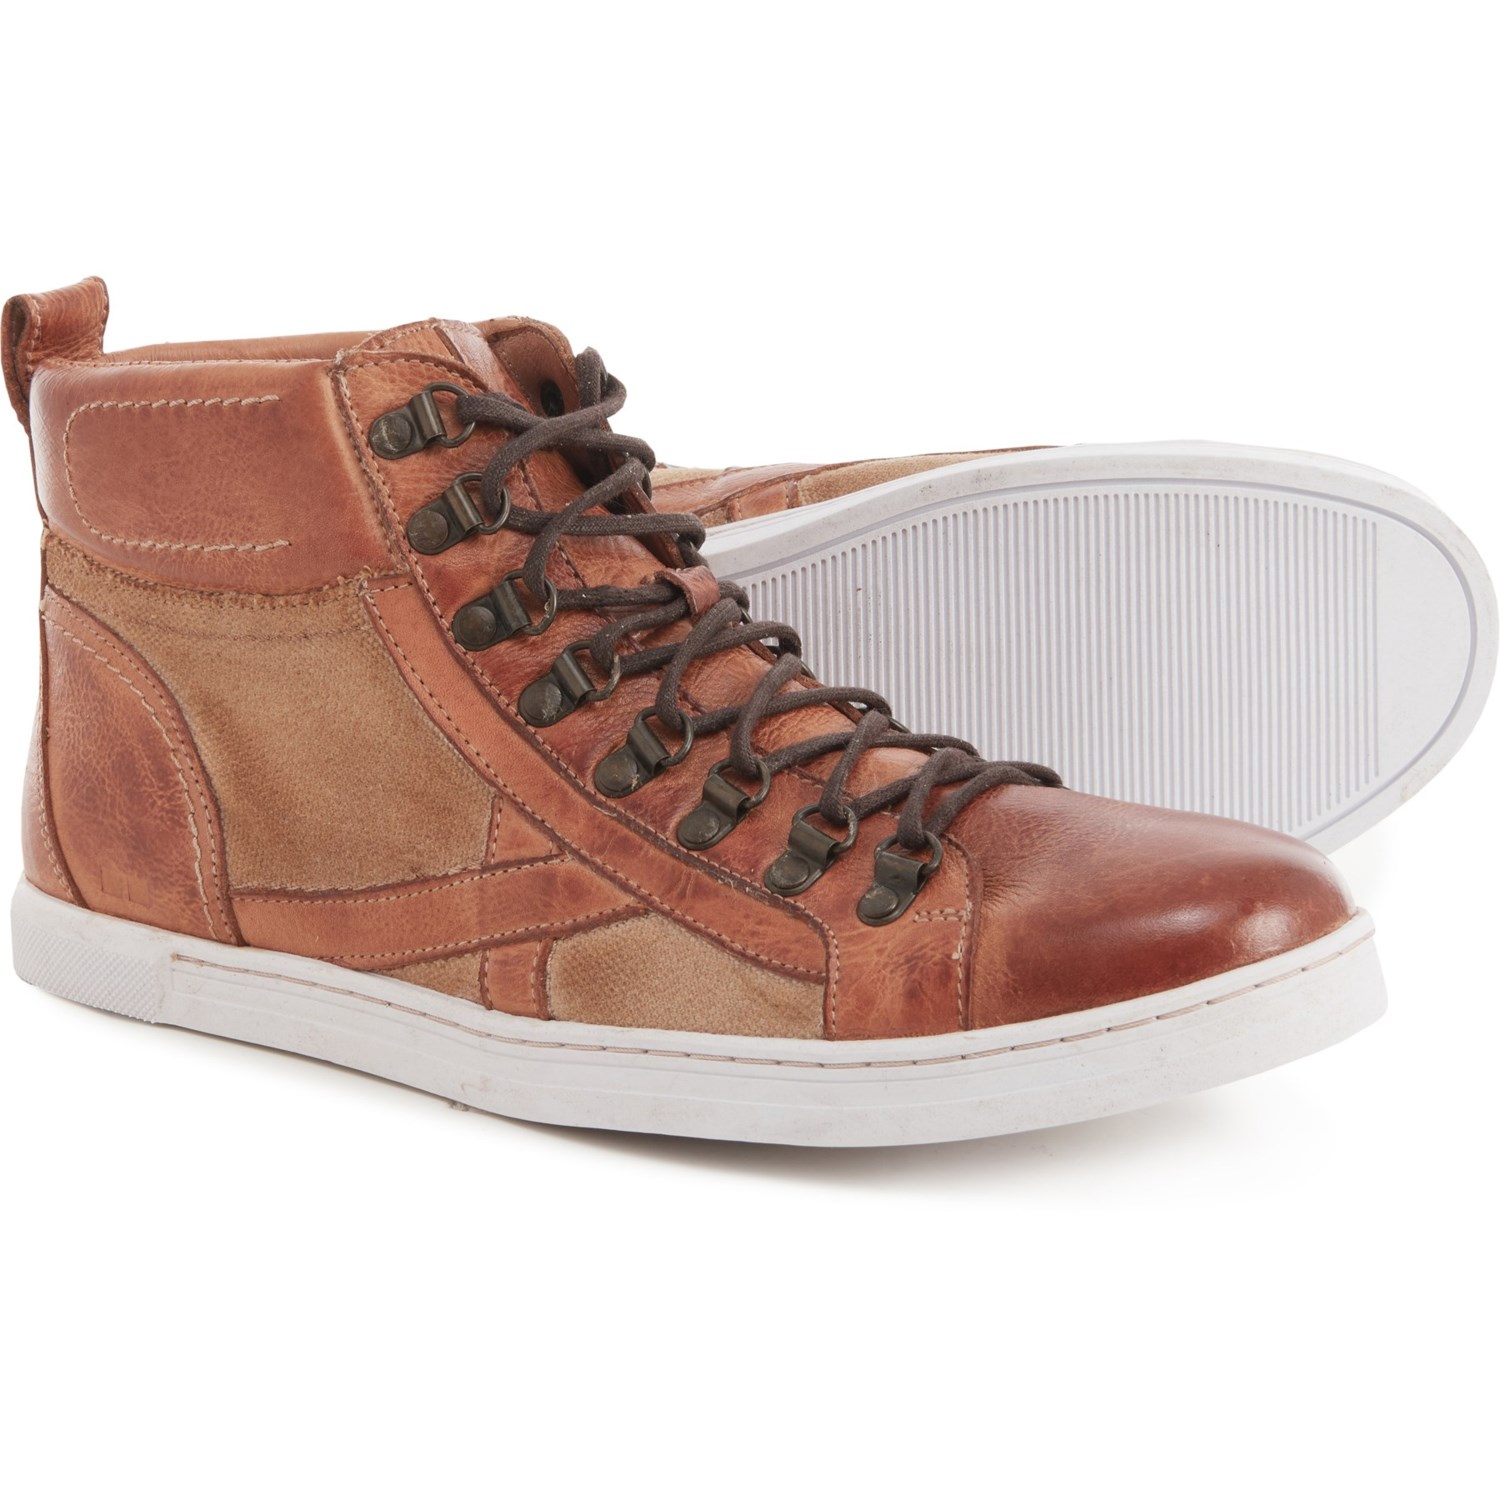 Bed Stu Brentwood Boots - Leather (For Men)